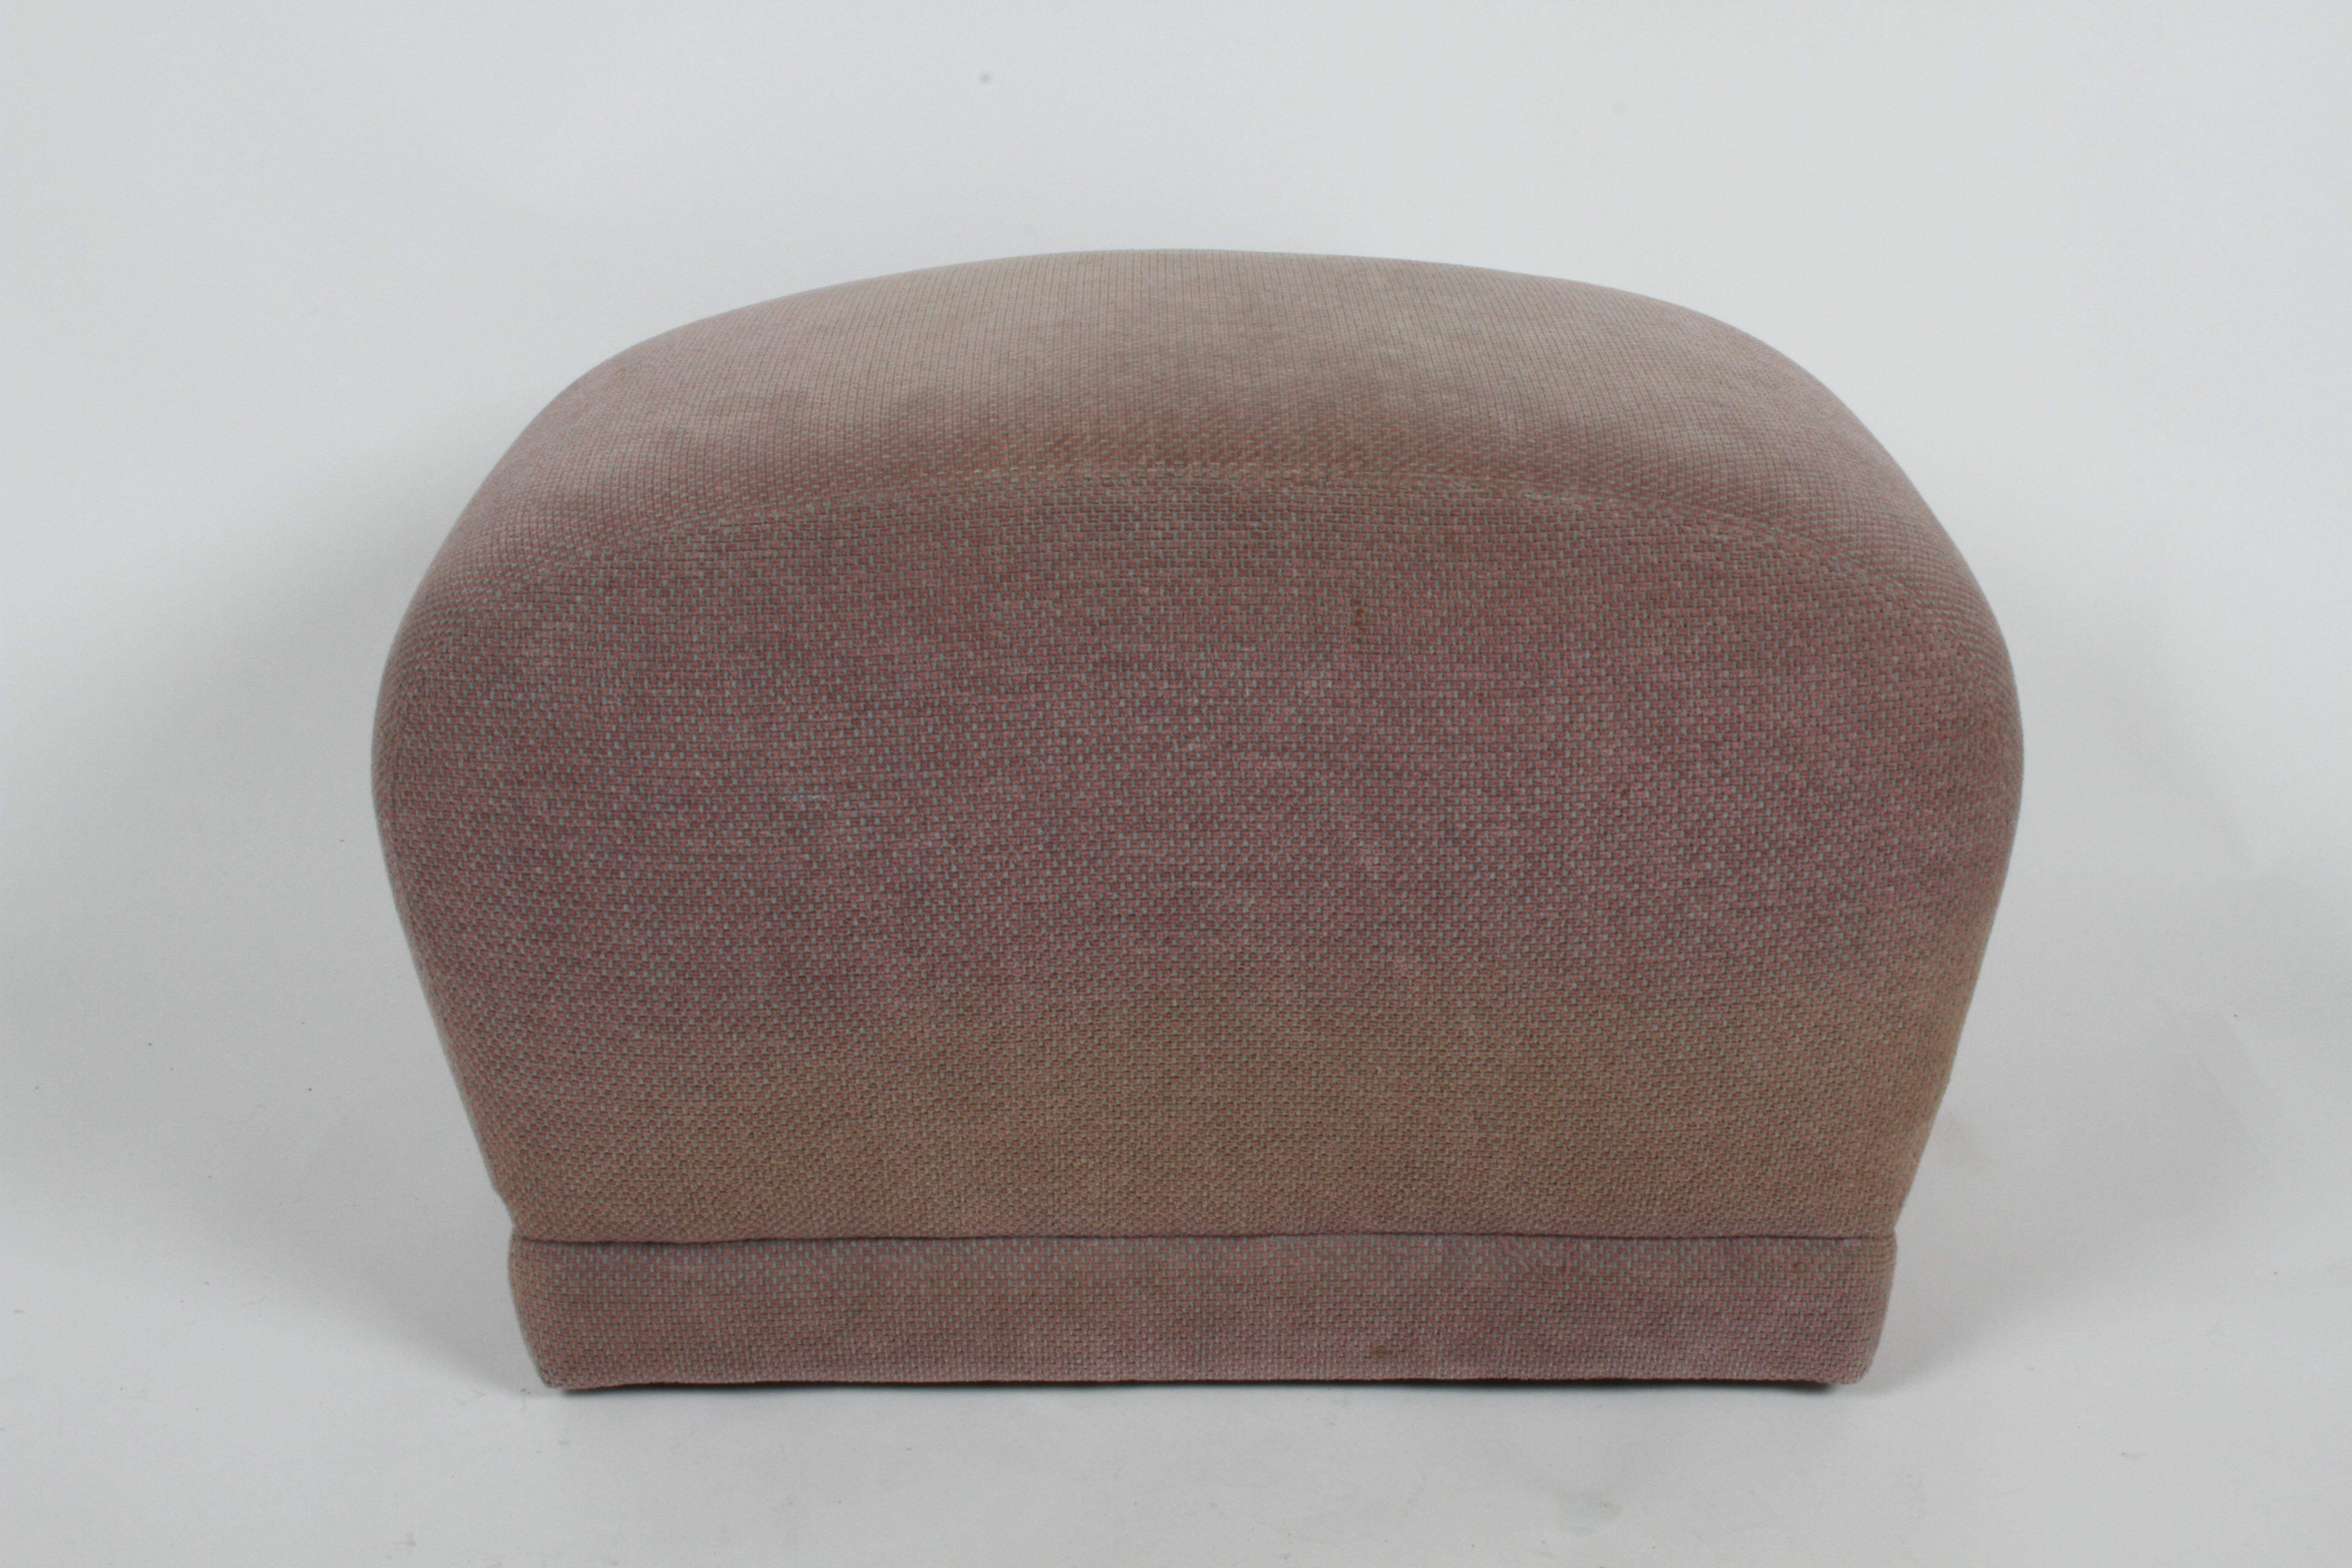 Pair of 1980's Upholstered Poufs or Ottomans on Castors, Style of Milo Baughman 3